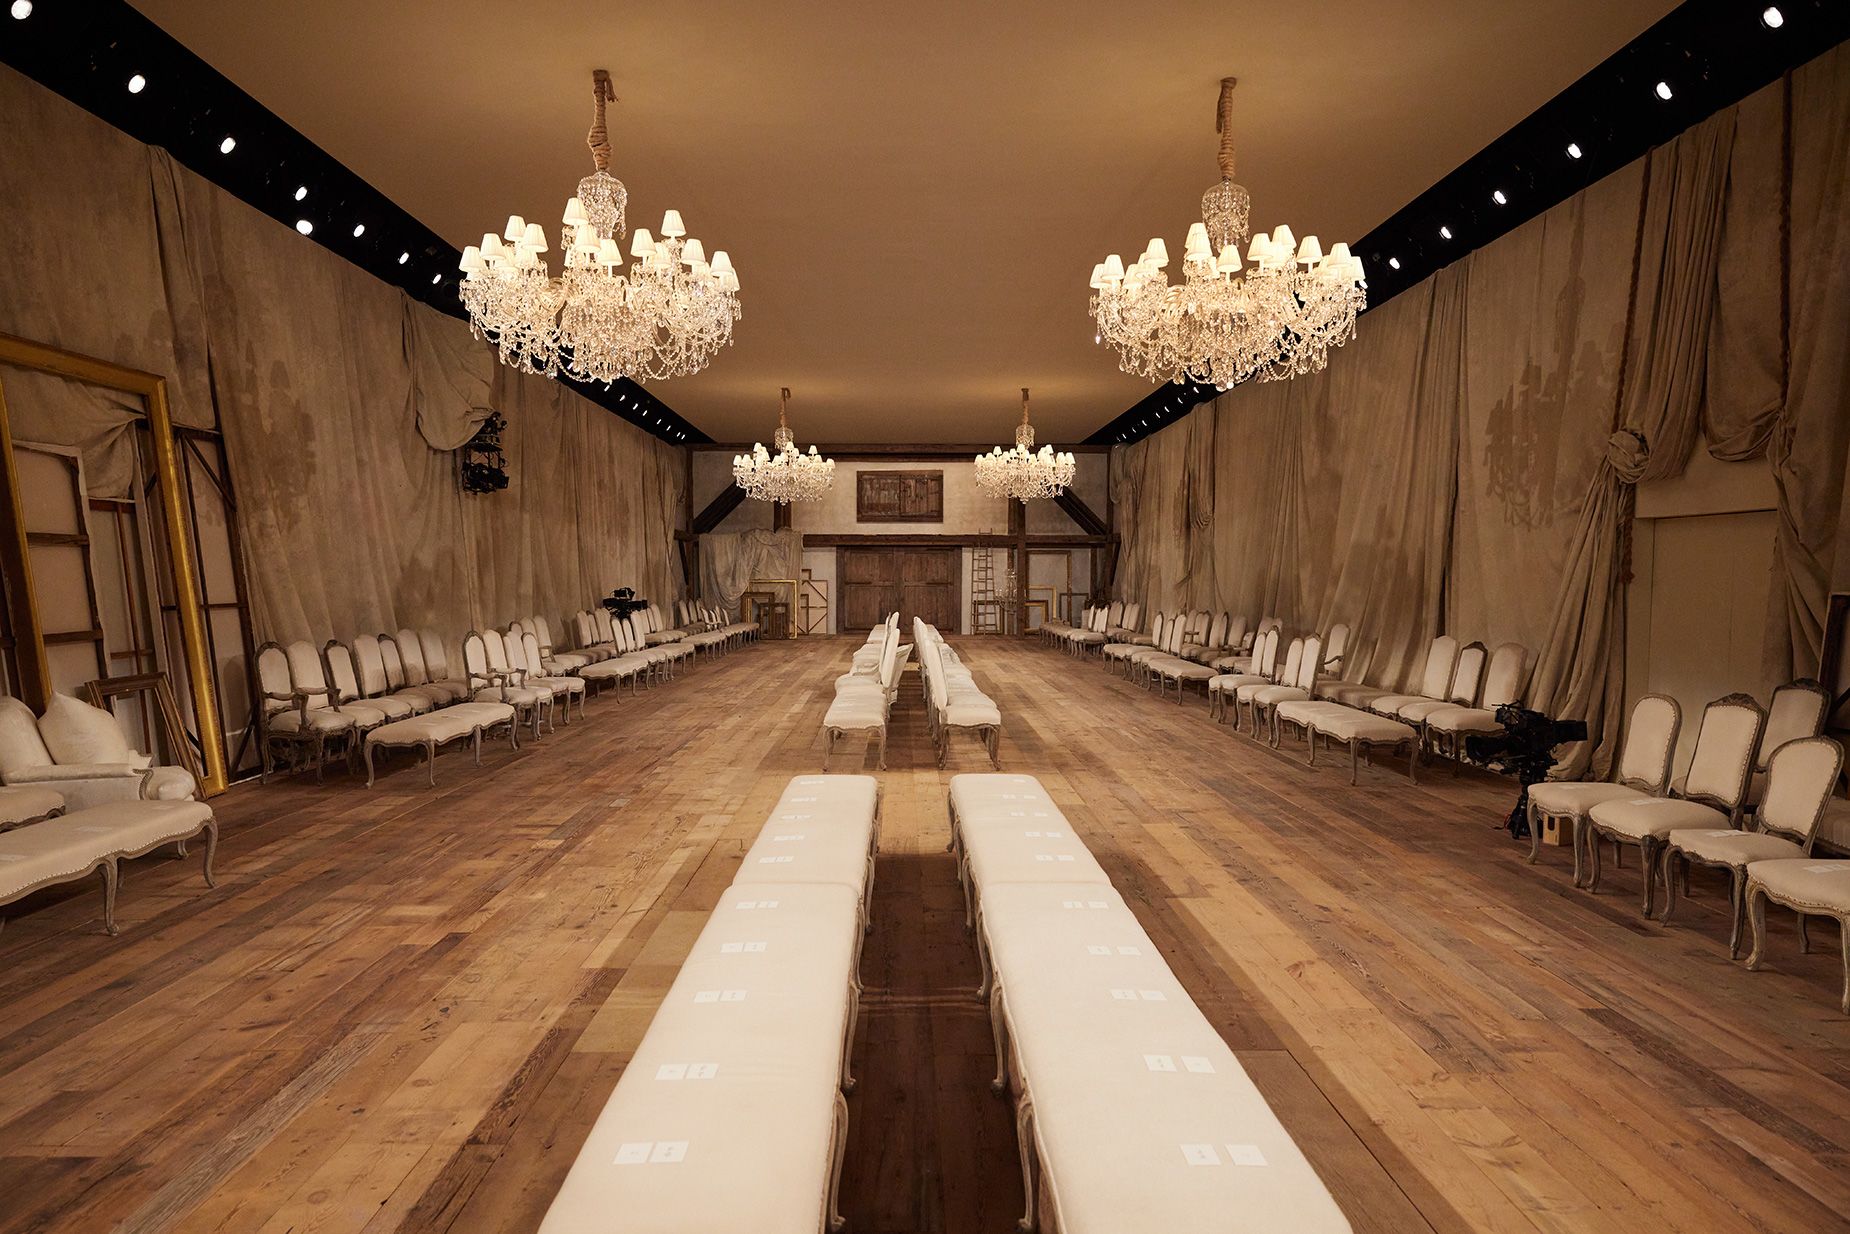 The show took place in "an unassuming utilitarian warehouse... transformed into a world of romance and rusticity," a Ralph Lauren press release read.